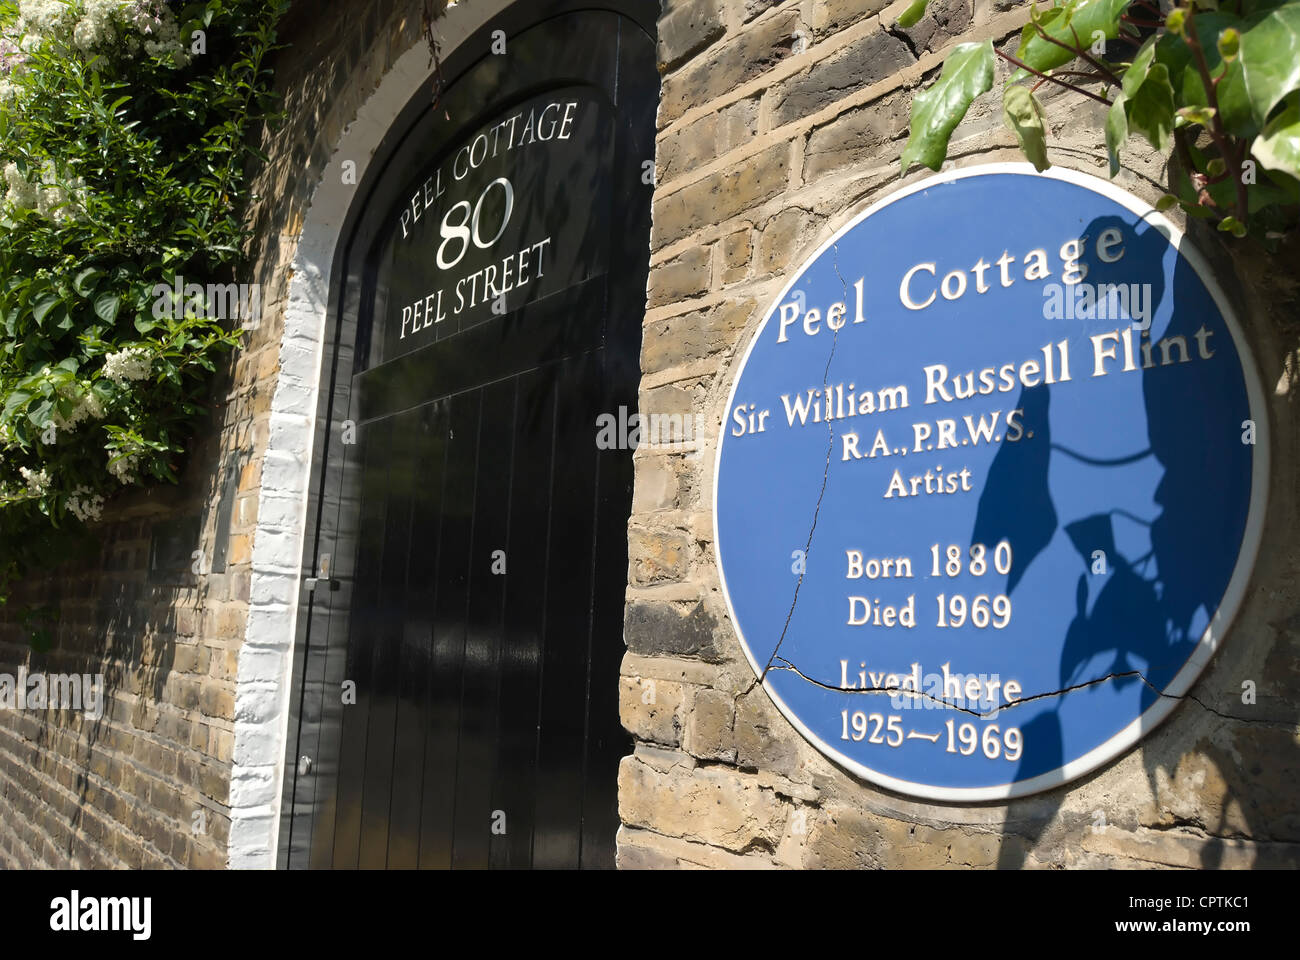 entrance and blue plaque marking peel cottage, a home of artist sir william russell flint, kensington, london, england Stock Photo